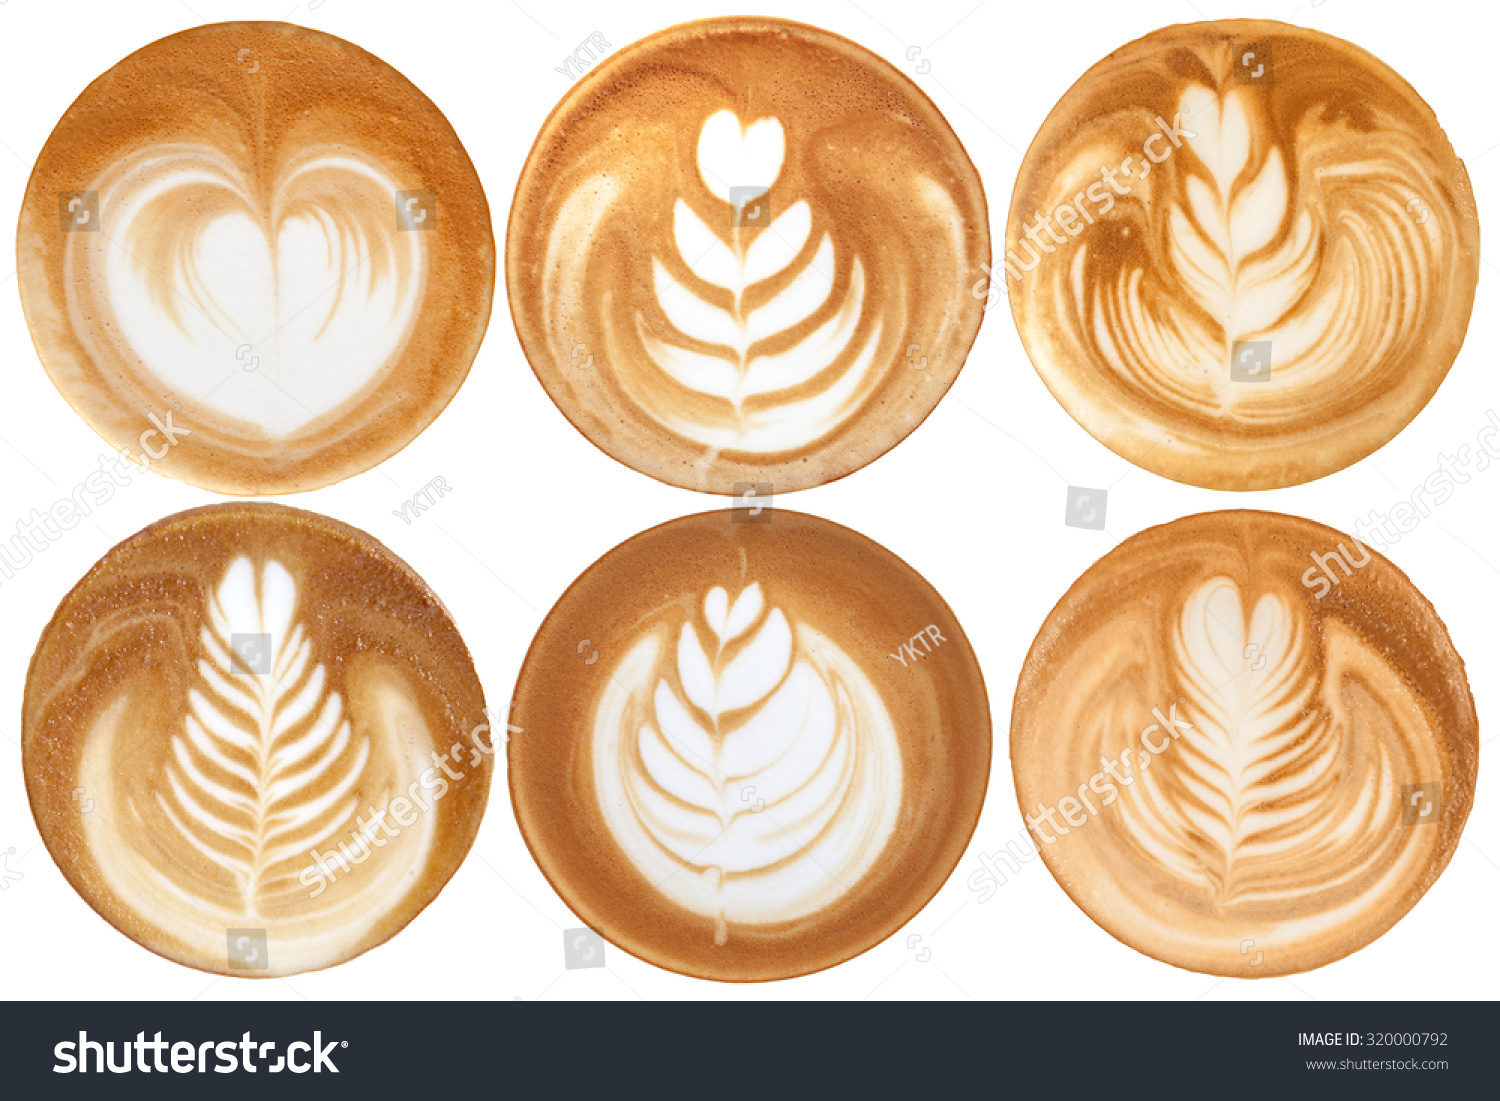 List of latte art shapes on white background isolated #320000792